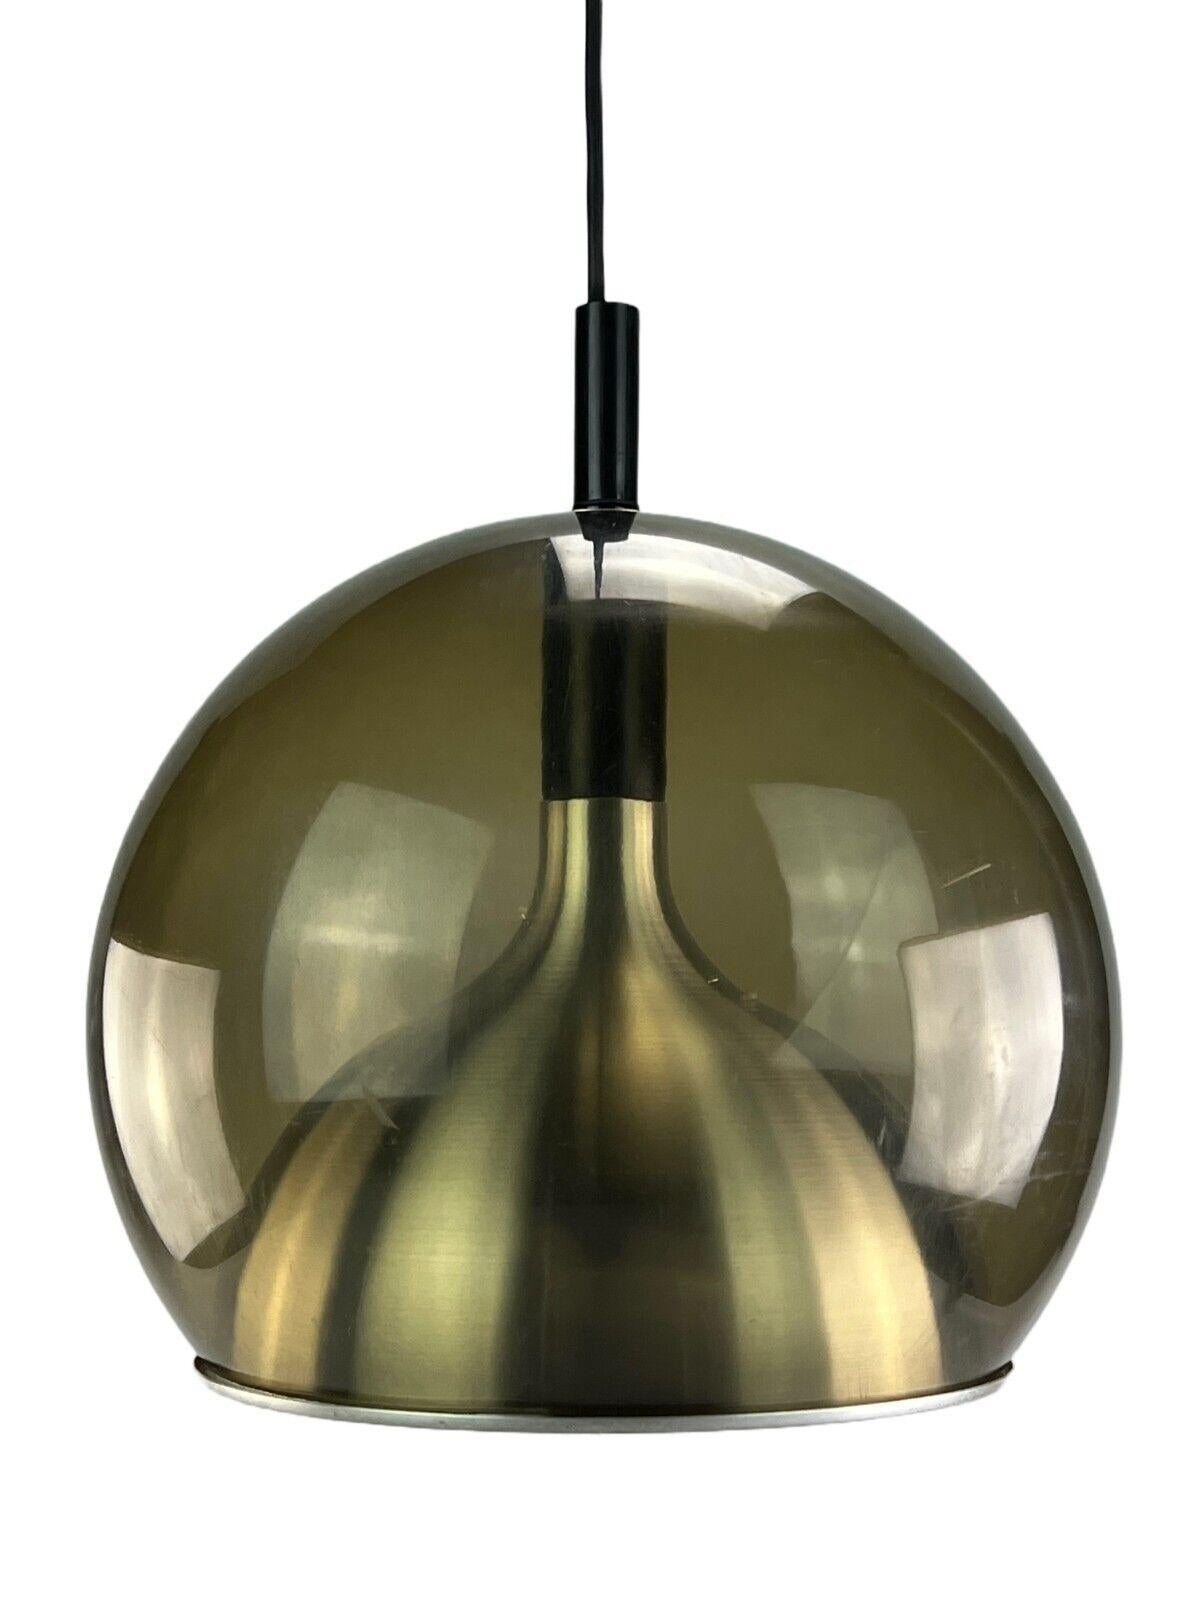 60s 70s lamp light ceiling lamp hanging lamp Temde plastic Space Age

Object: ceiling lamp

Manufacturer: Temde

Condition: Good - vintage

Age: around 1960-1970

Dimensions:

Diameter = 40cm
Height = 42cm

Other notes:

The pictures serve as part